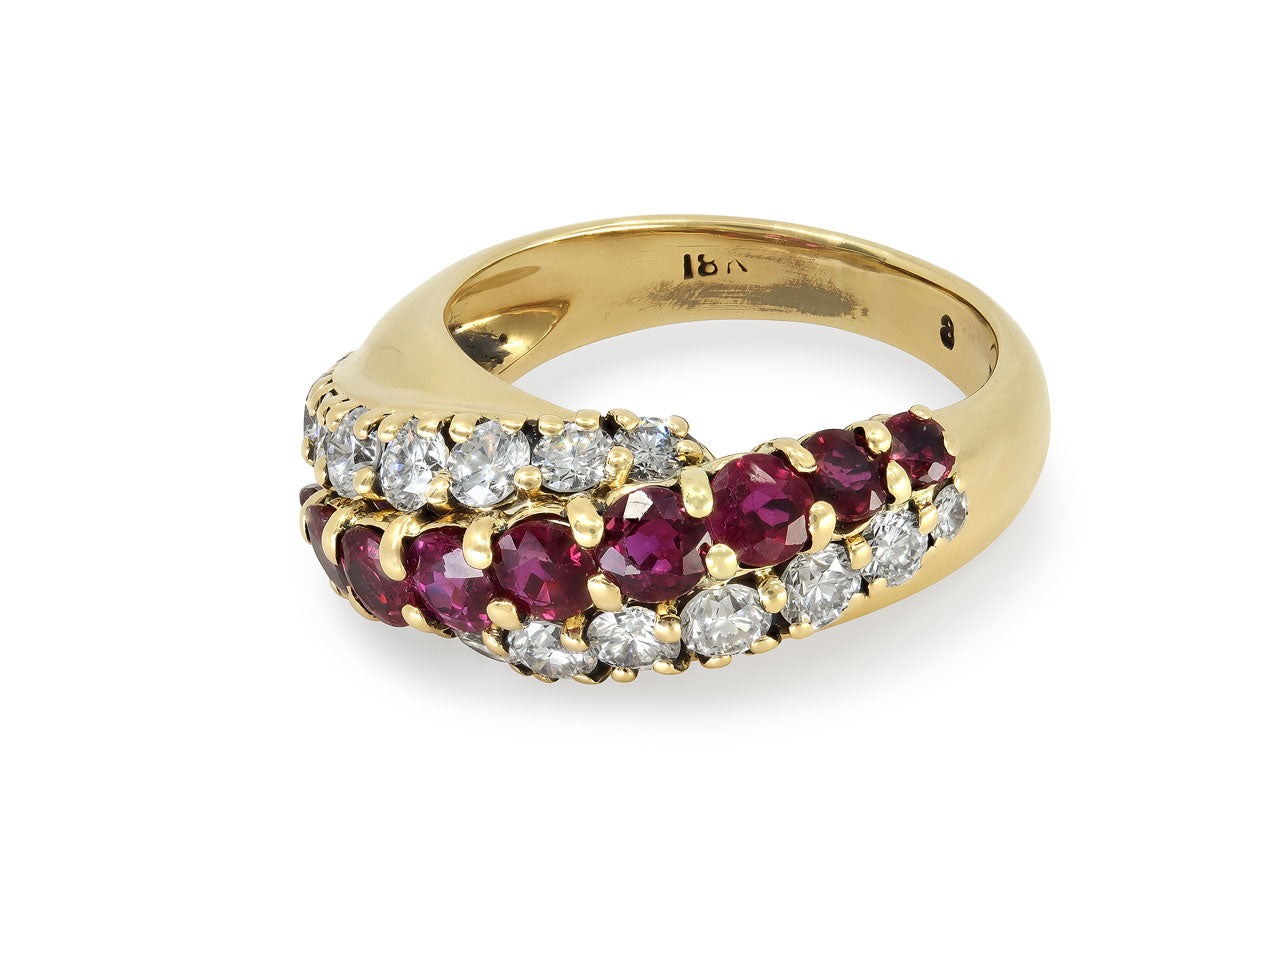 Hammerman Brothers Ruby and Diamond Ring in 18K Gold